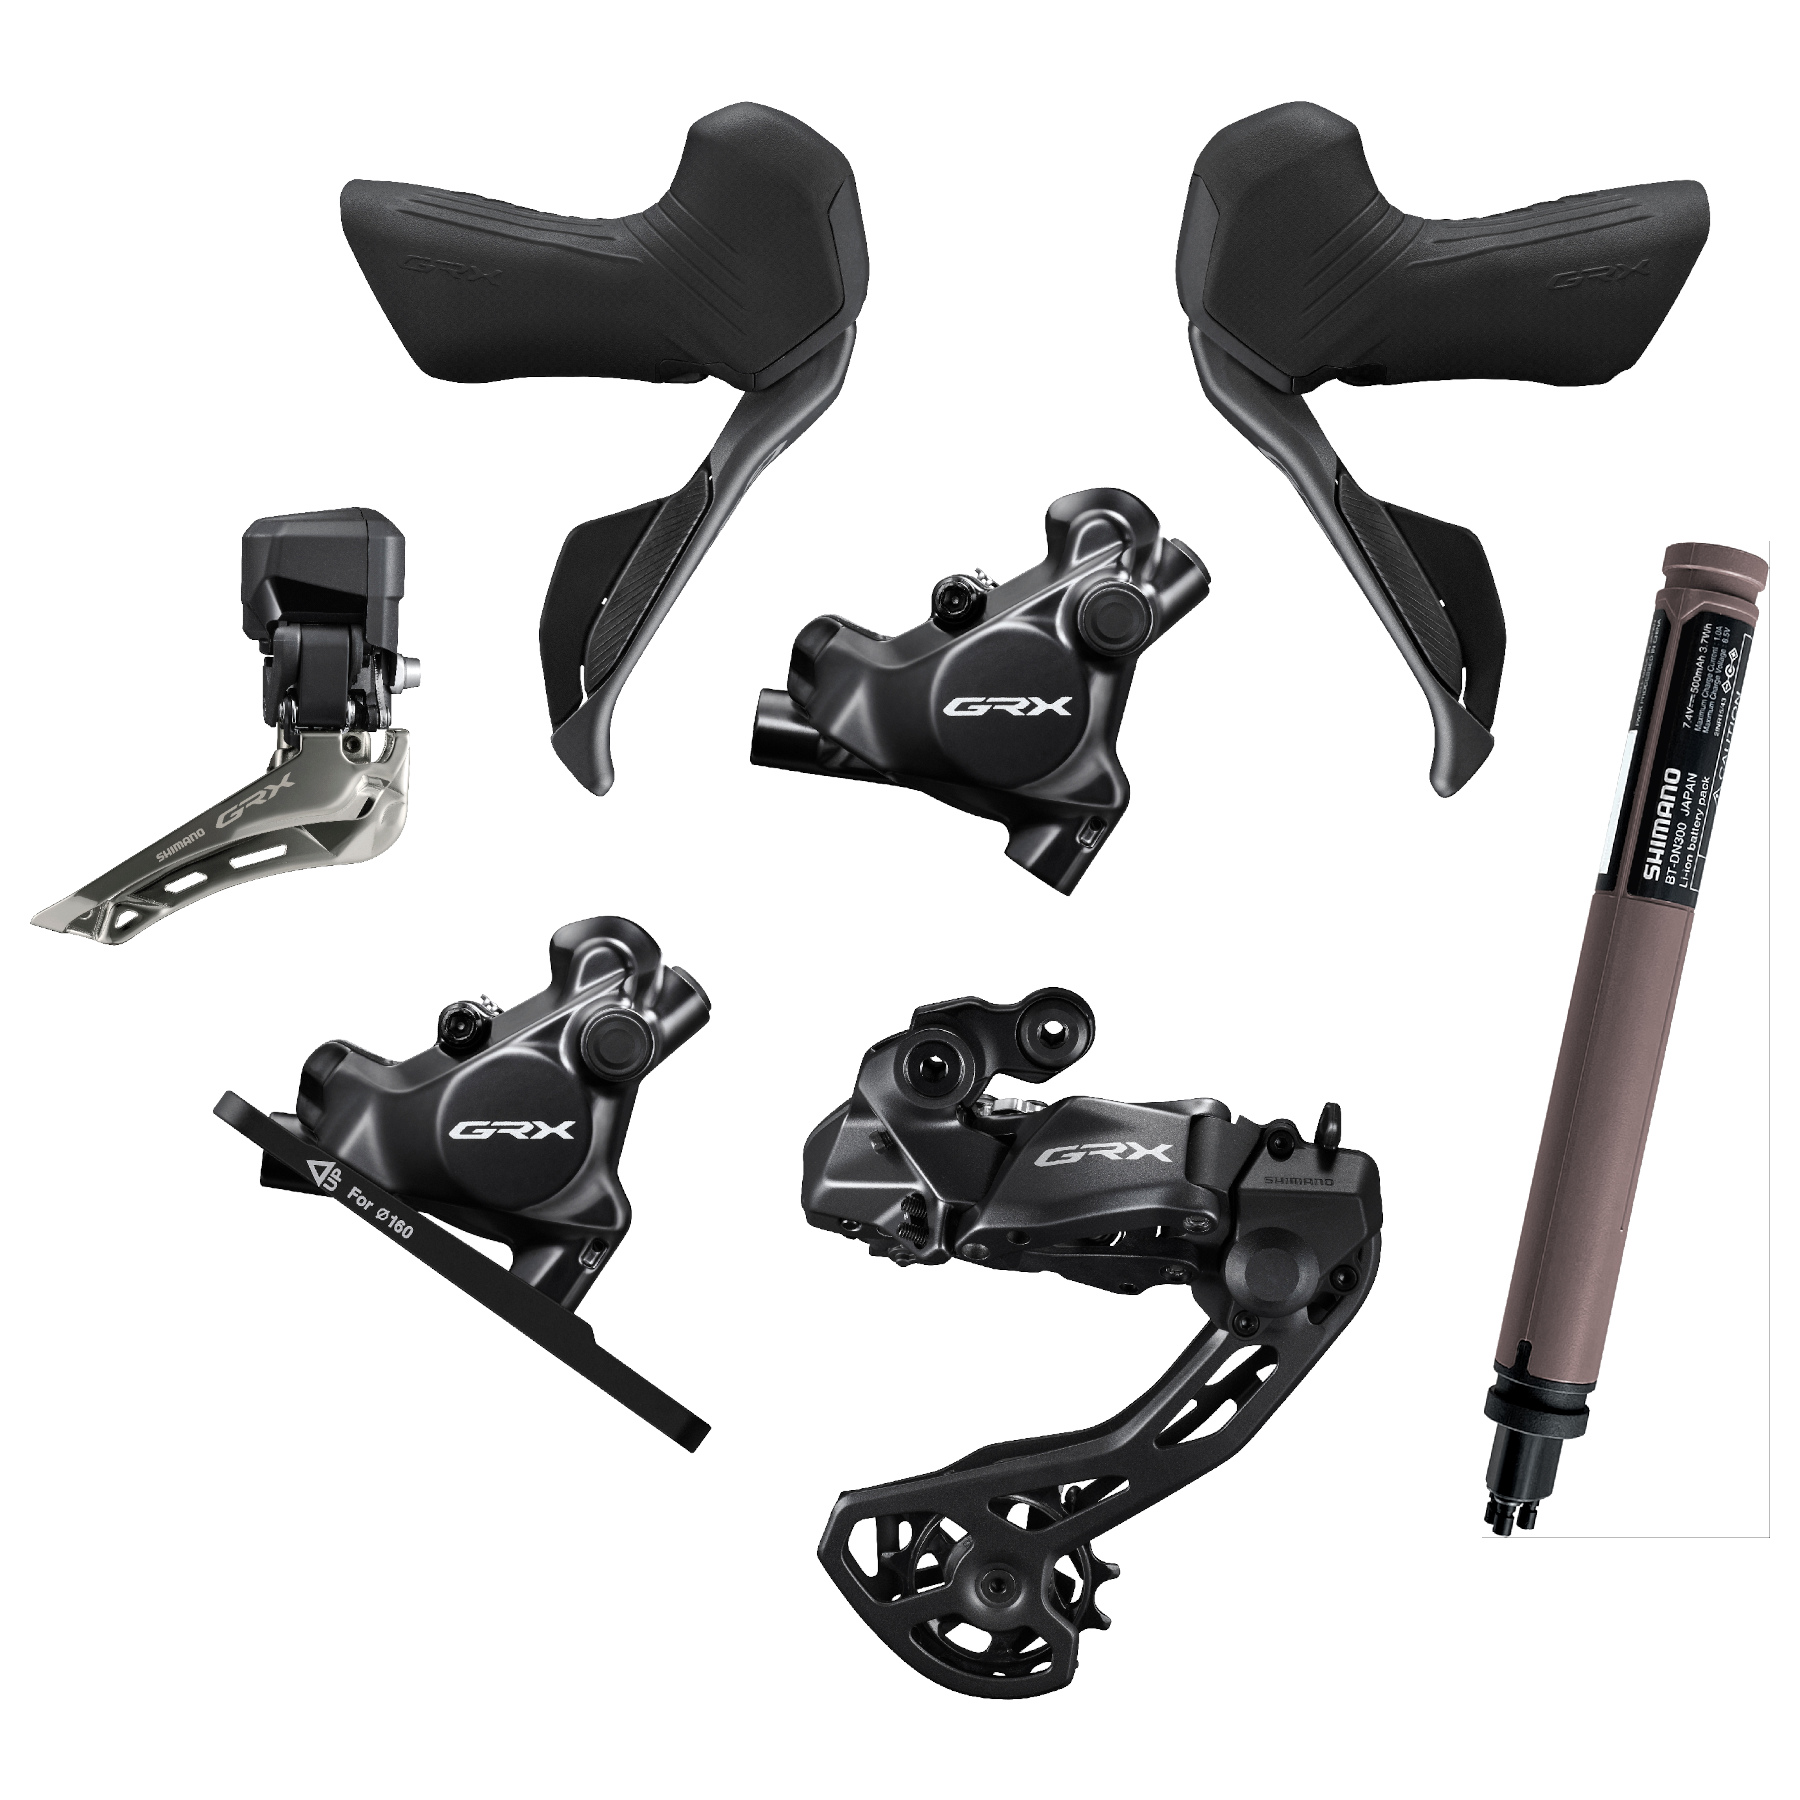 Picture of Shimano GRX RX825 Upgrade Kit - Di2 | 2x12-speed